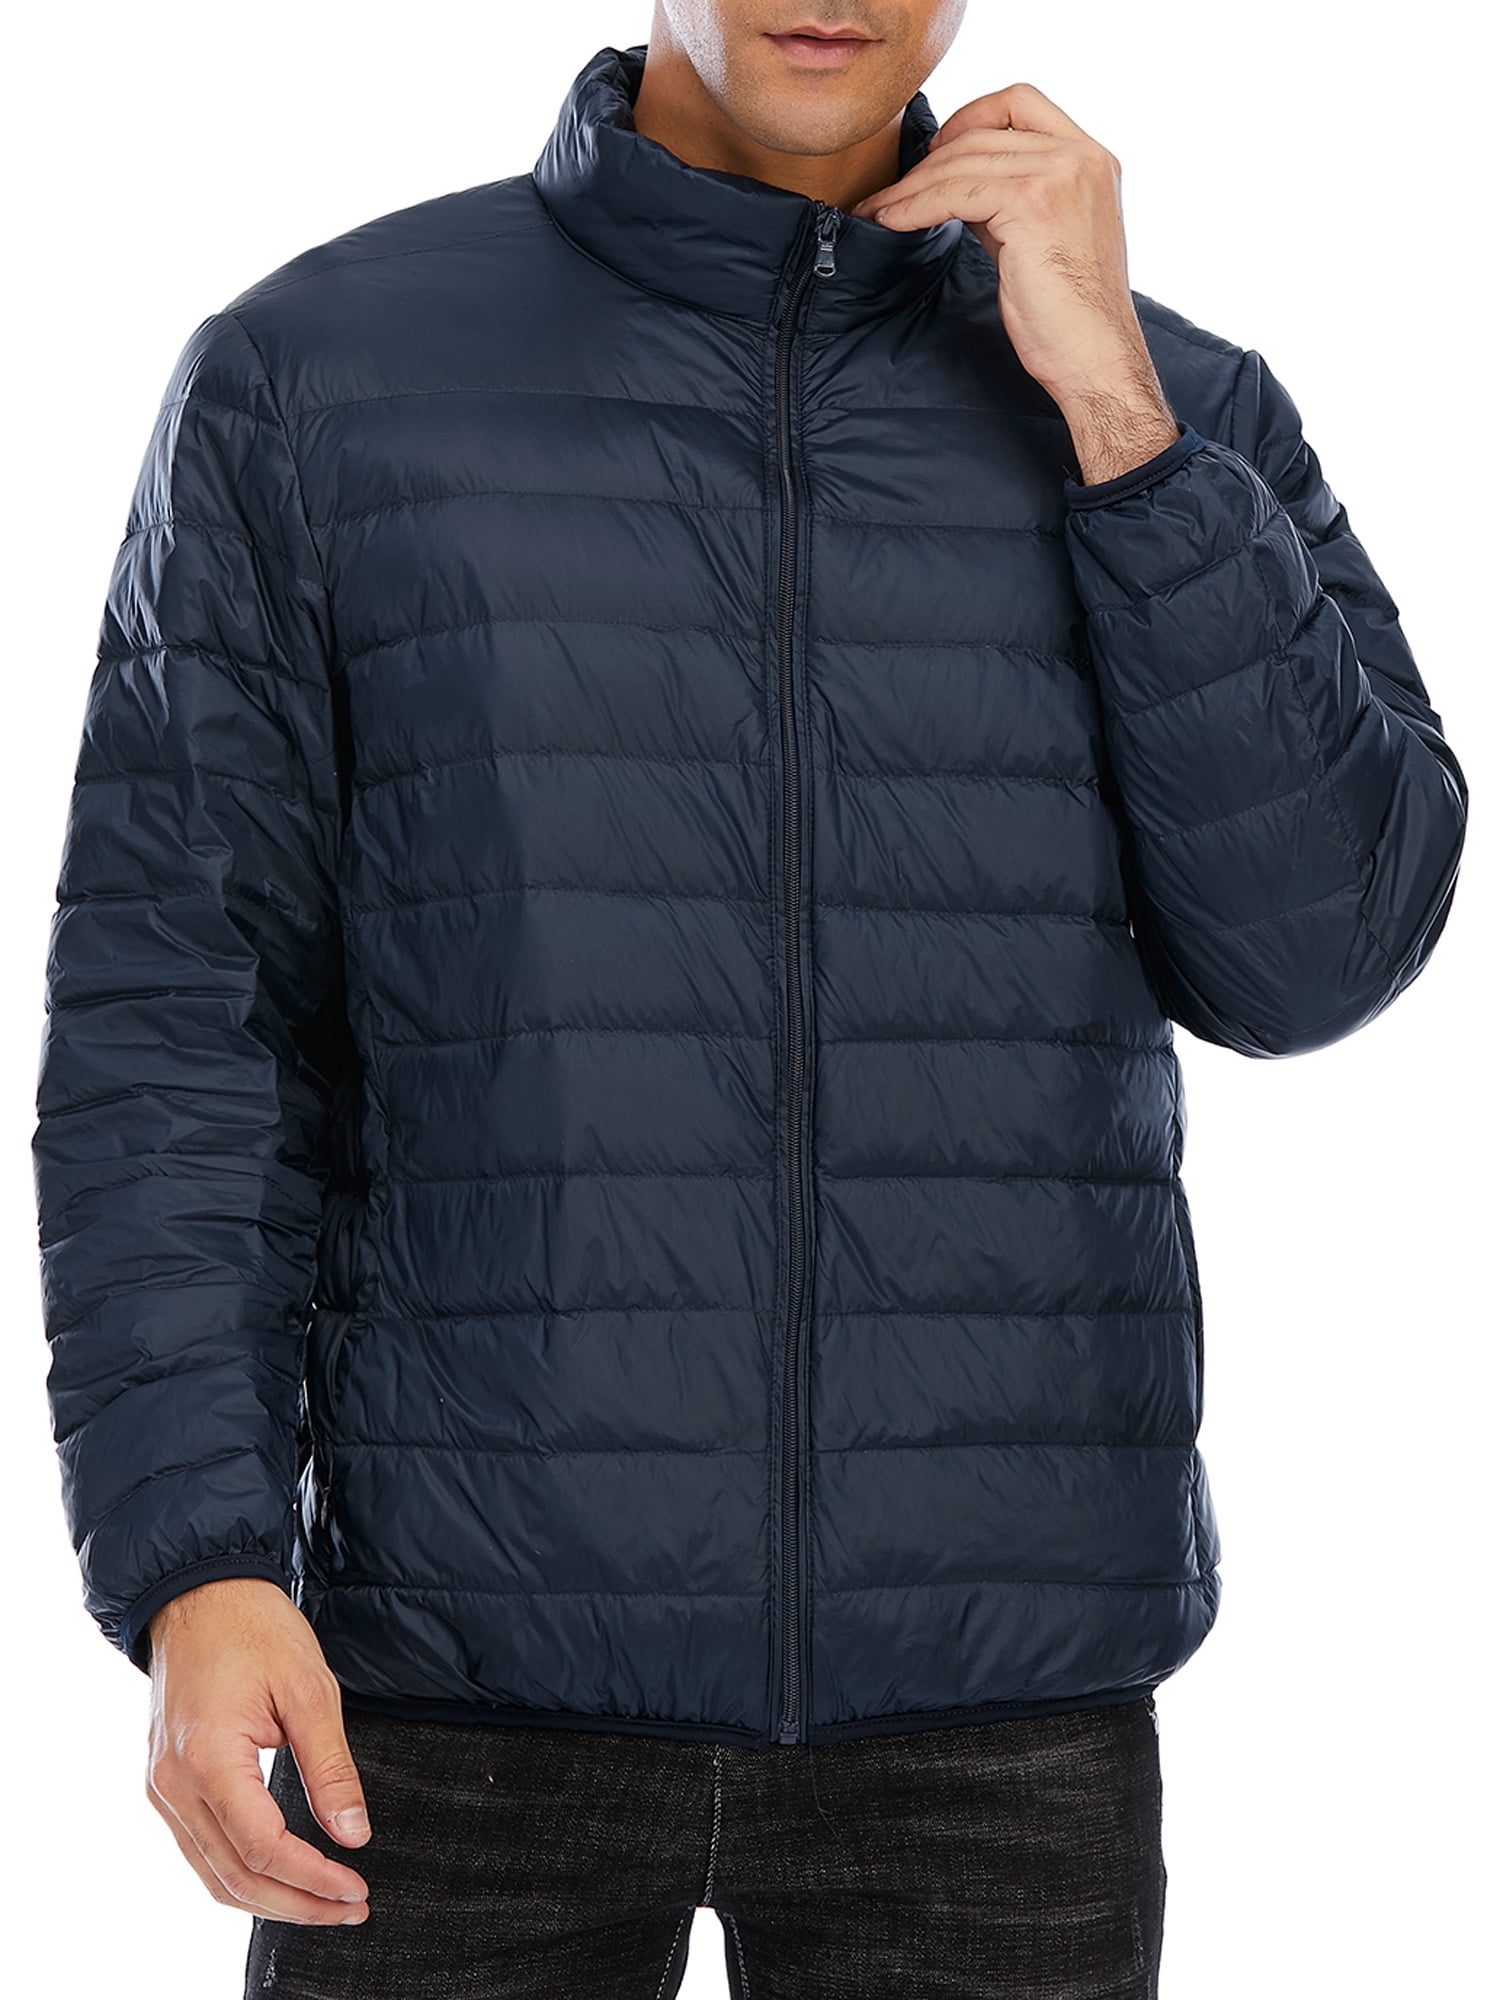 NEW MENS BUBBLE COAT HOODED QUILTED PADDED PLAIN PUFFER WARM THICK JACKETS SIZE